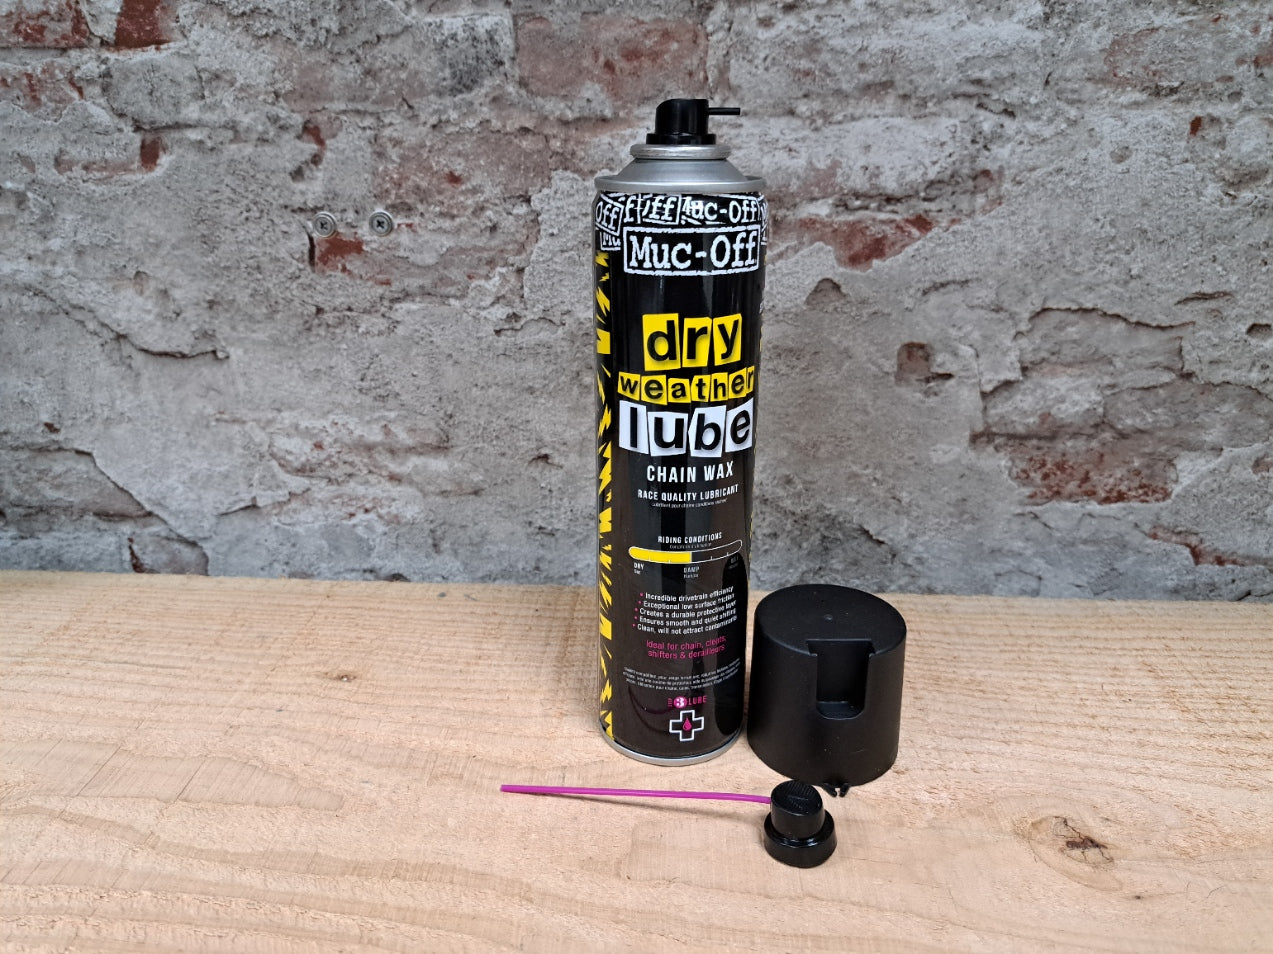 Muc-Off Cycle Dry Weather Chain Lube